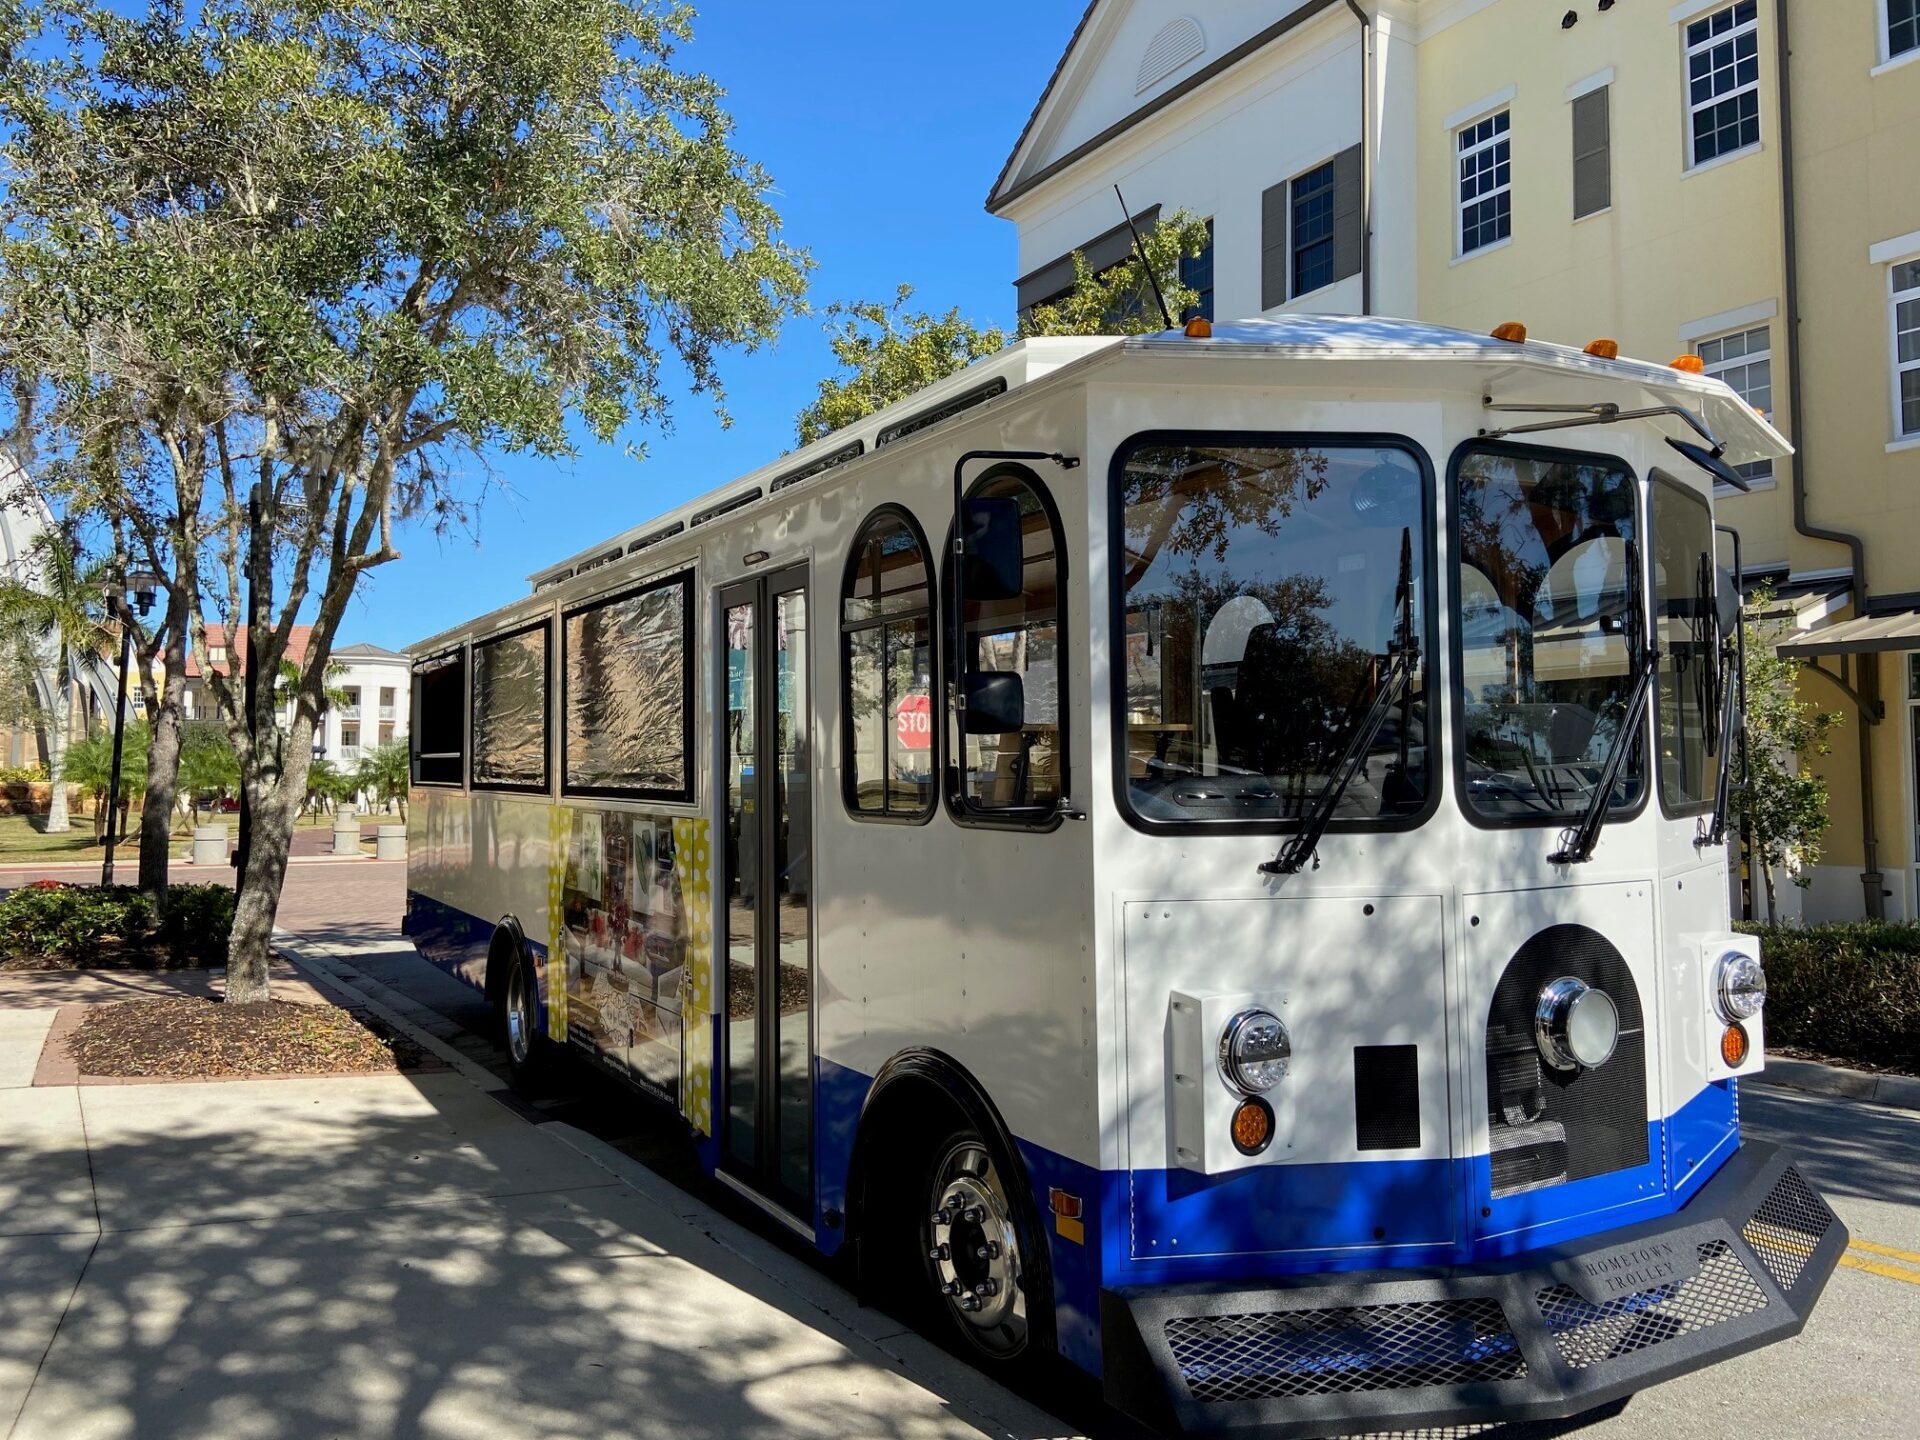 Trolley tour bus in Ave Maria